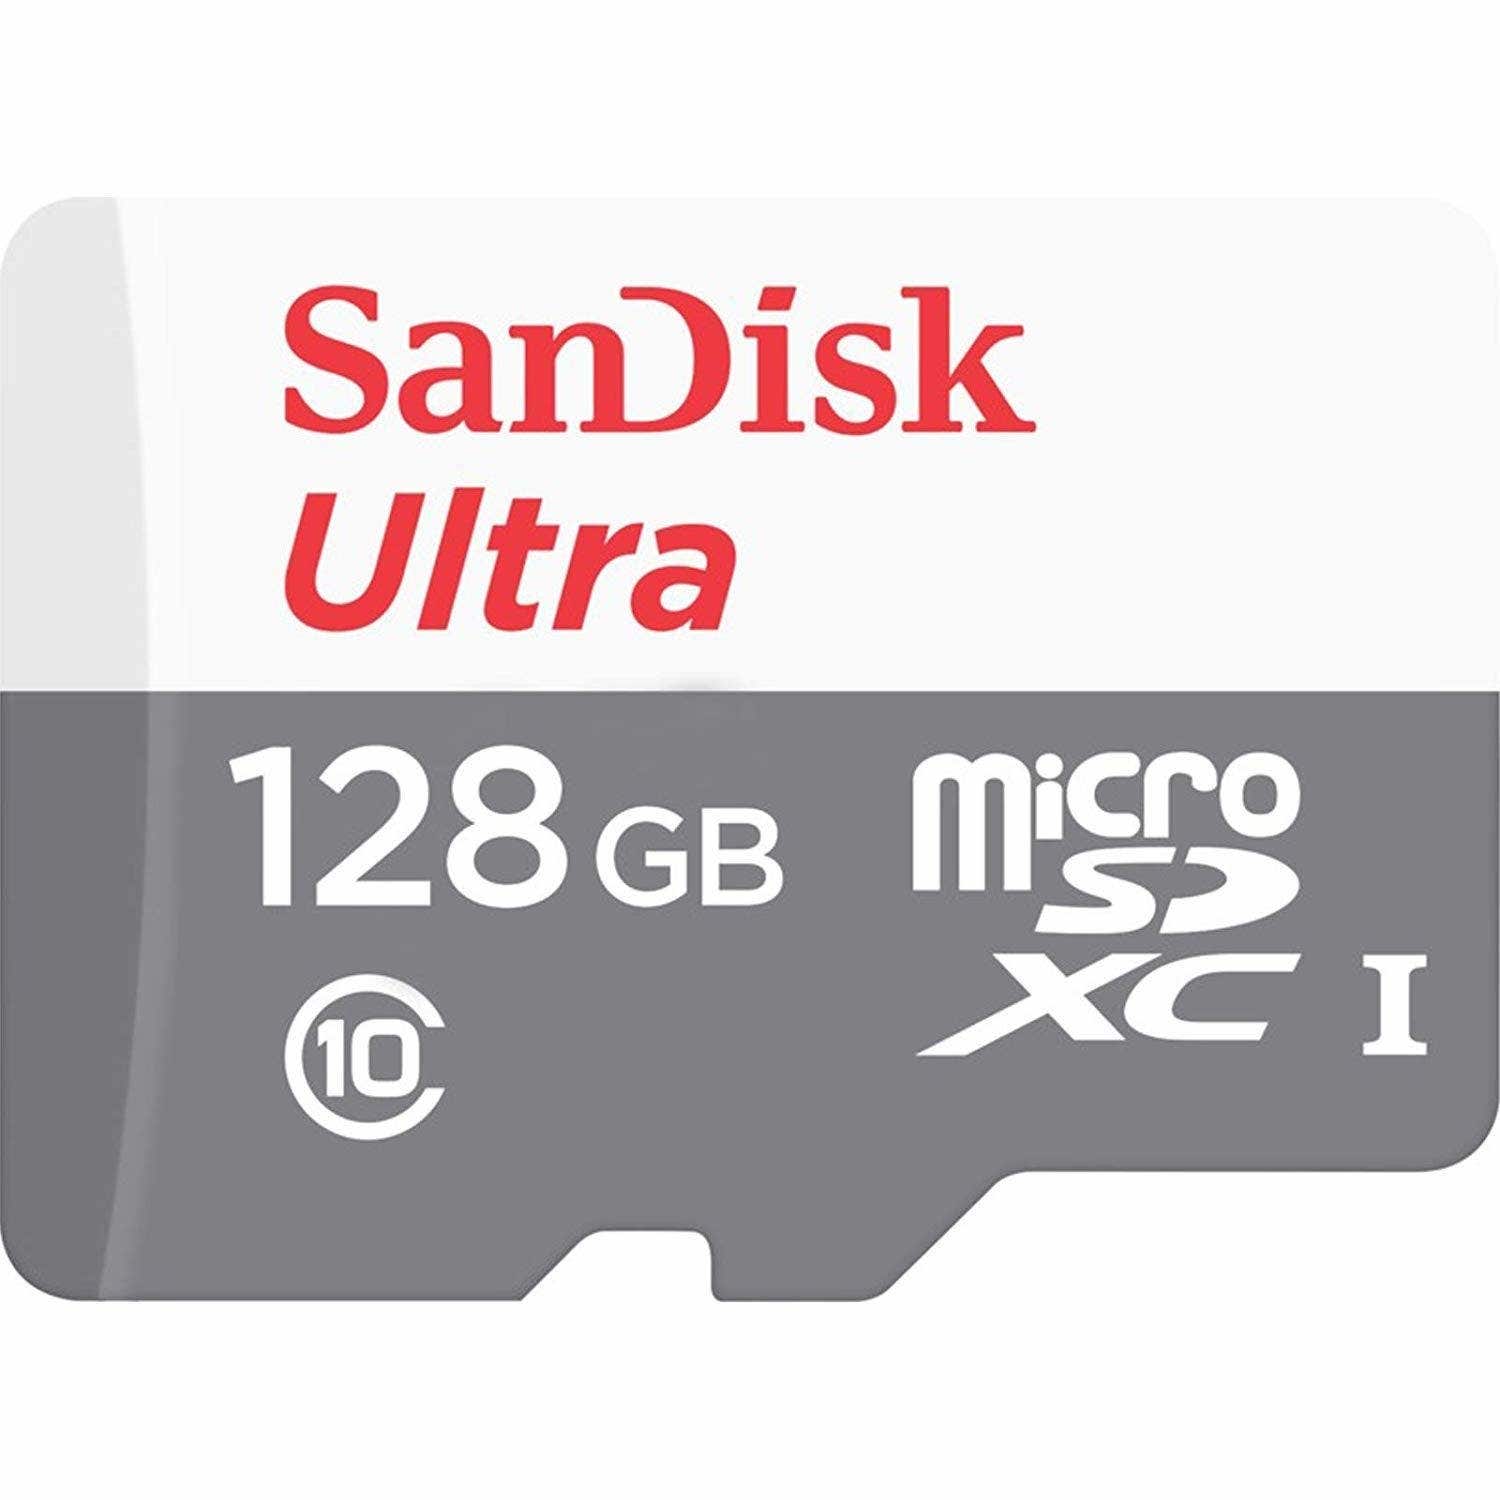 SanDisk Ultra 128GB 80MB-s UHS-I Class 10 Micro SDHC Card